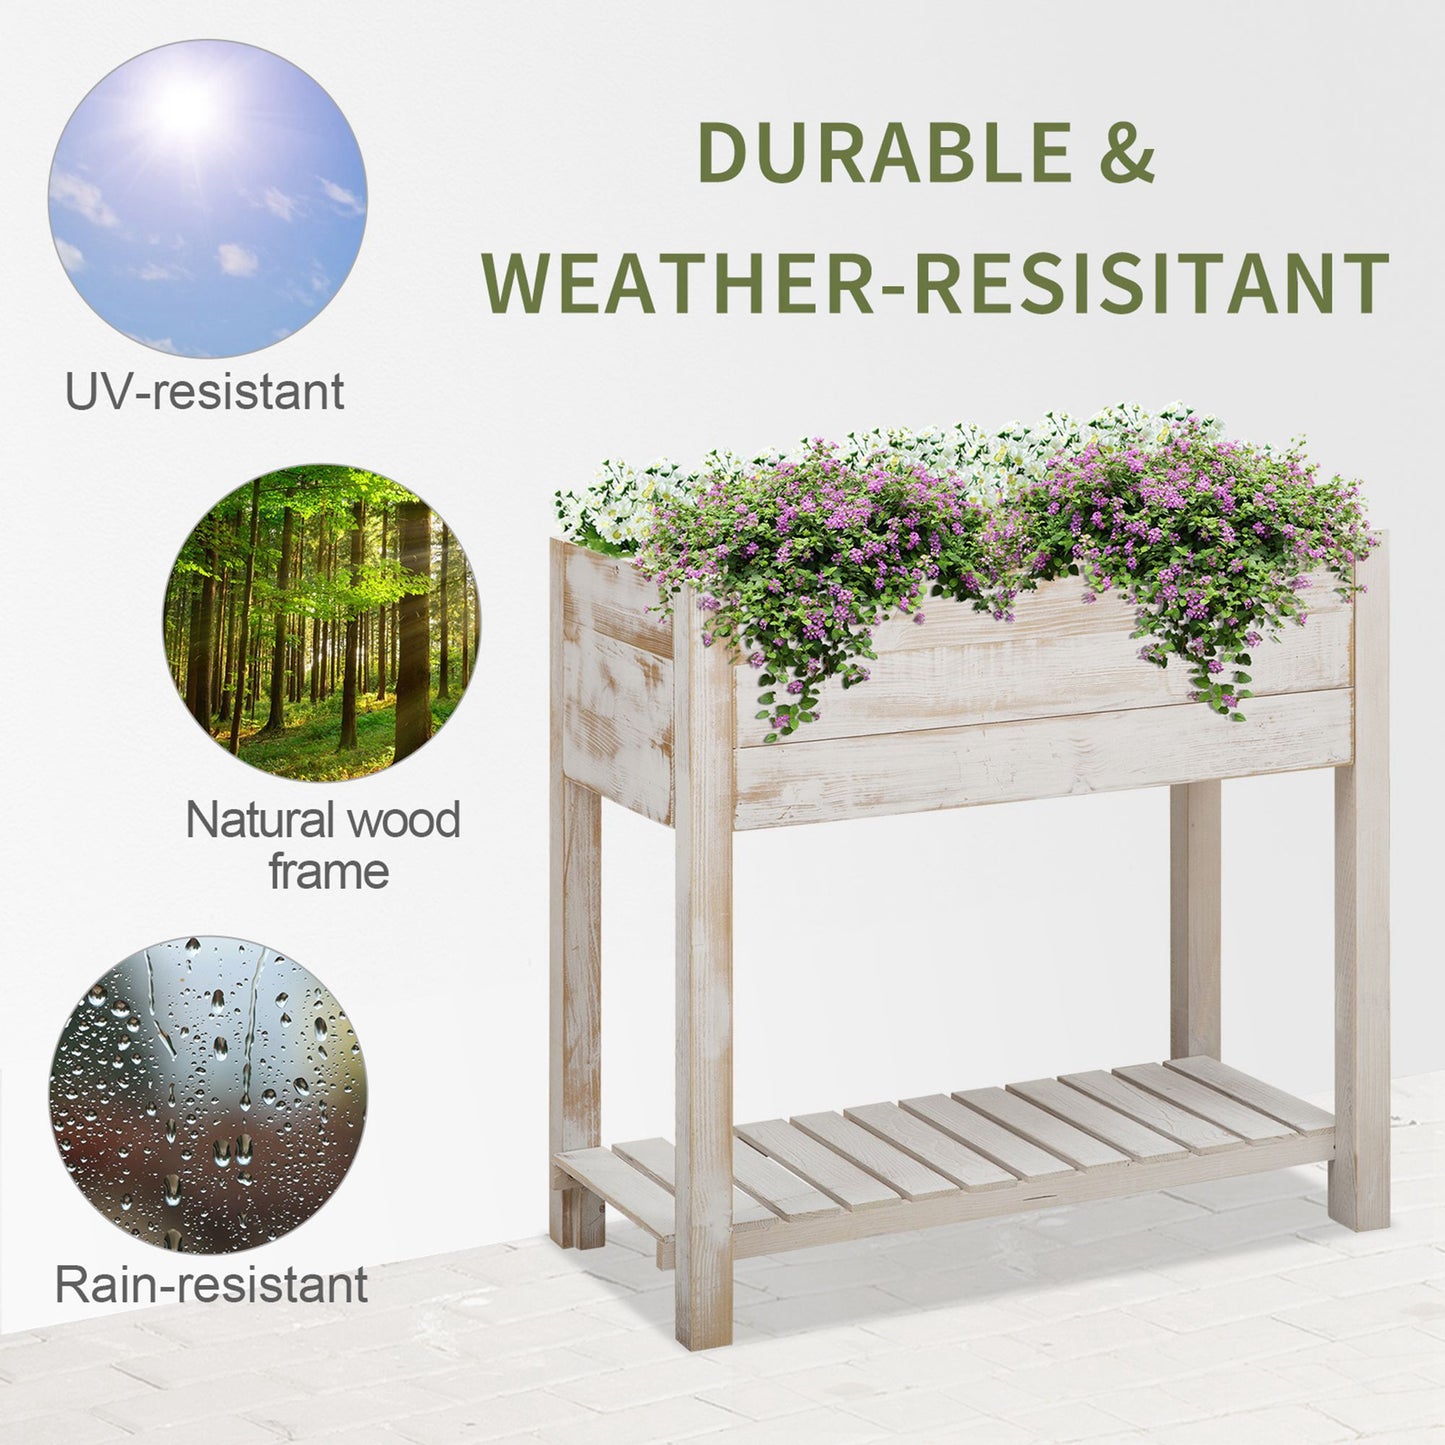 Outsunny Elevated Wooden Planter Garden Grow Box with 2 tiers, 4 Pockets